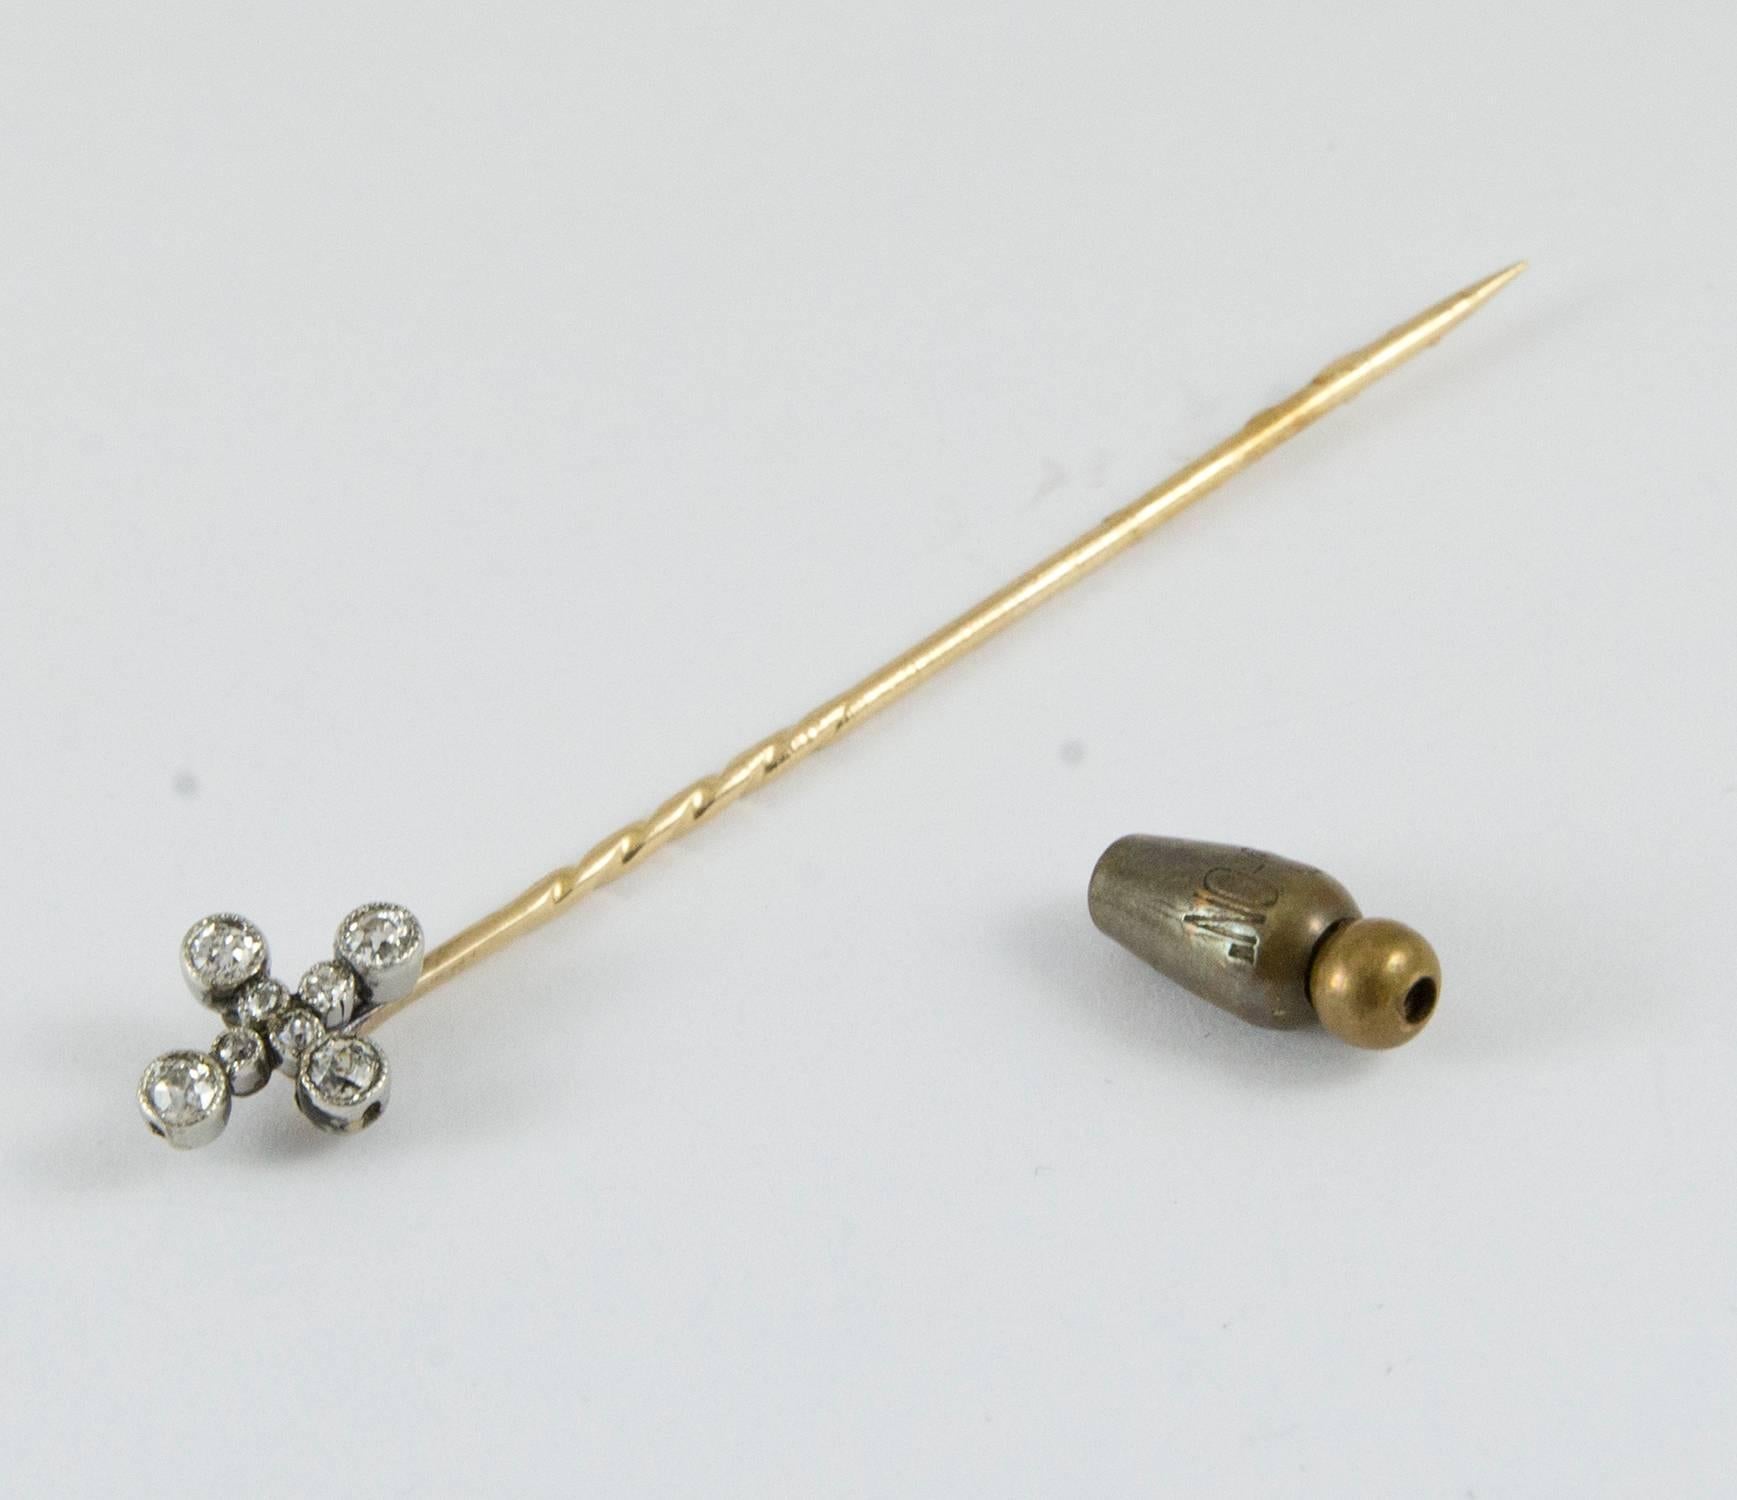 A delightful stick pin made Circa 1915. This stick pin holds eight old European cut diamonds weighing .38 ct. (G-H, SI-I).
The pin itself is 14k yellow gold and the diamonds are set in platinum. It measures 2.5 inches long and has the original